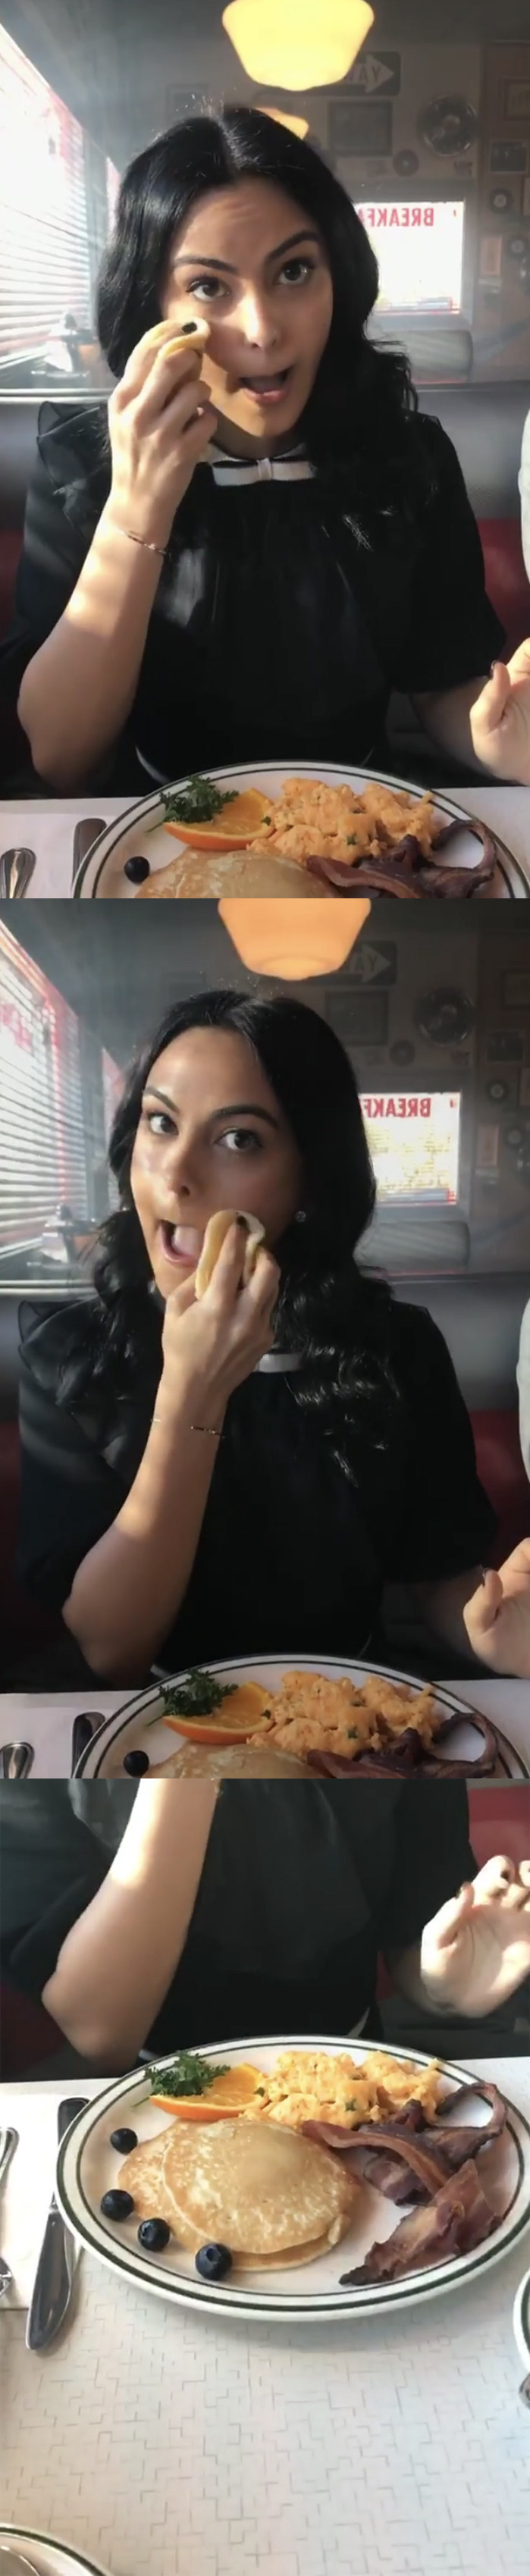 Camila Mendes wiping her face with a fake pancake